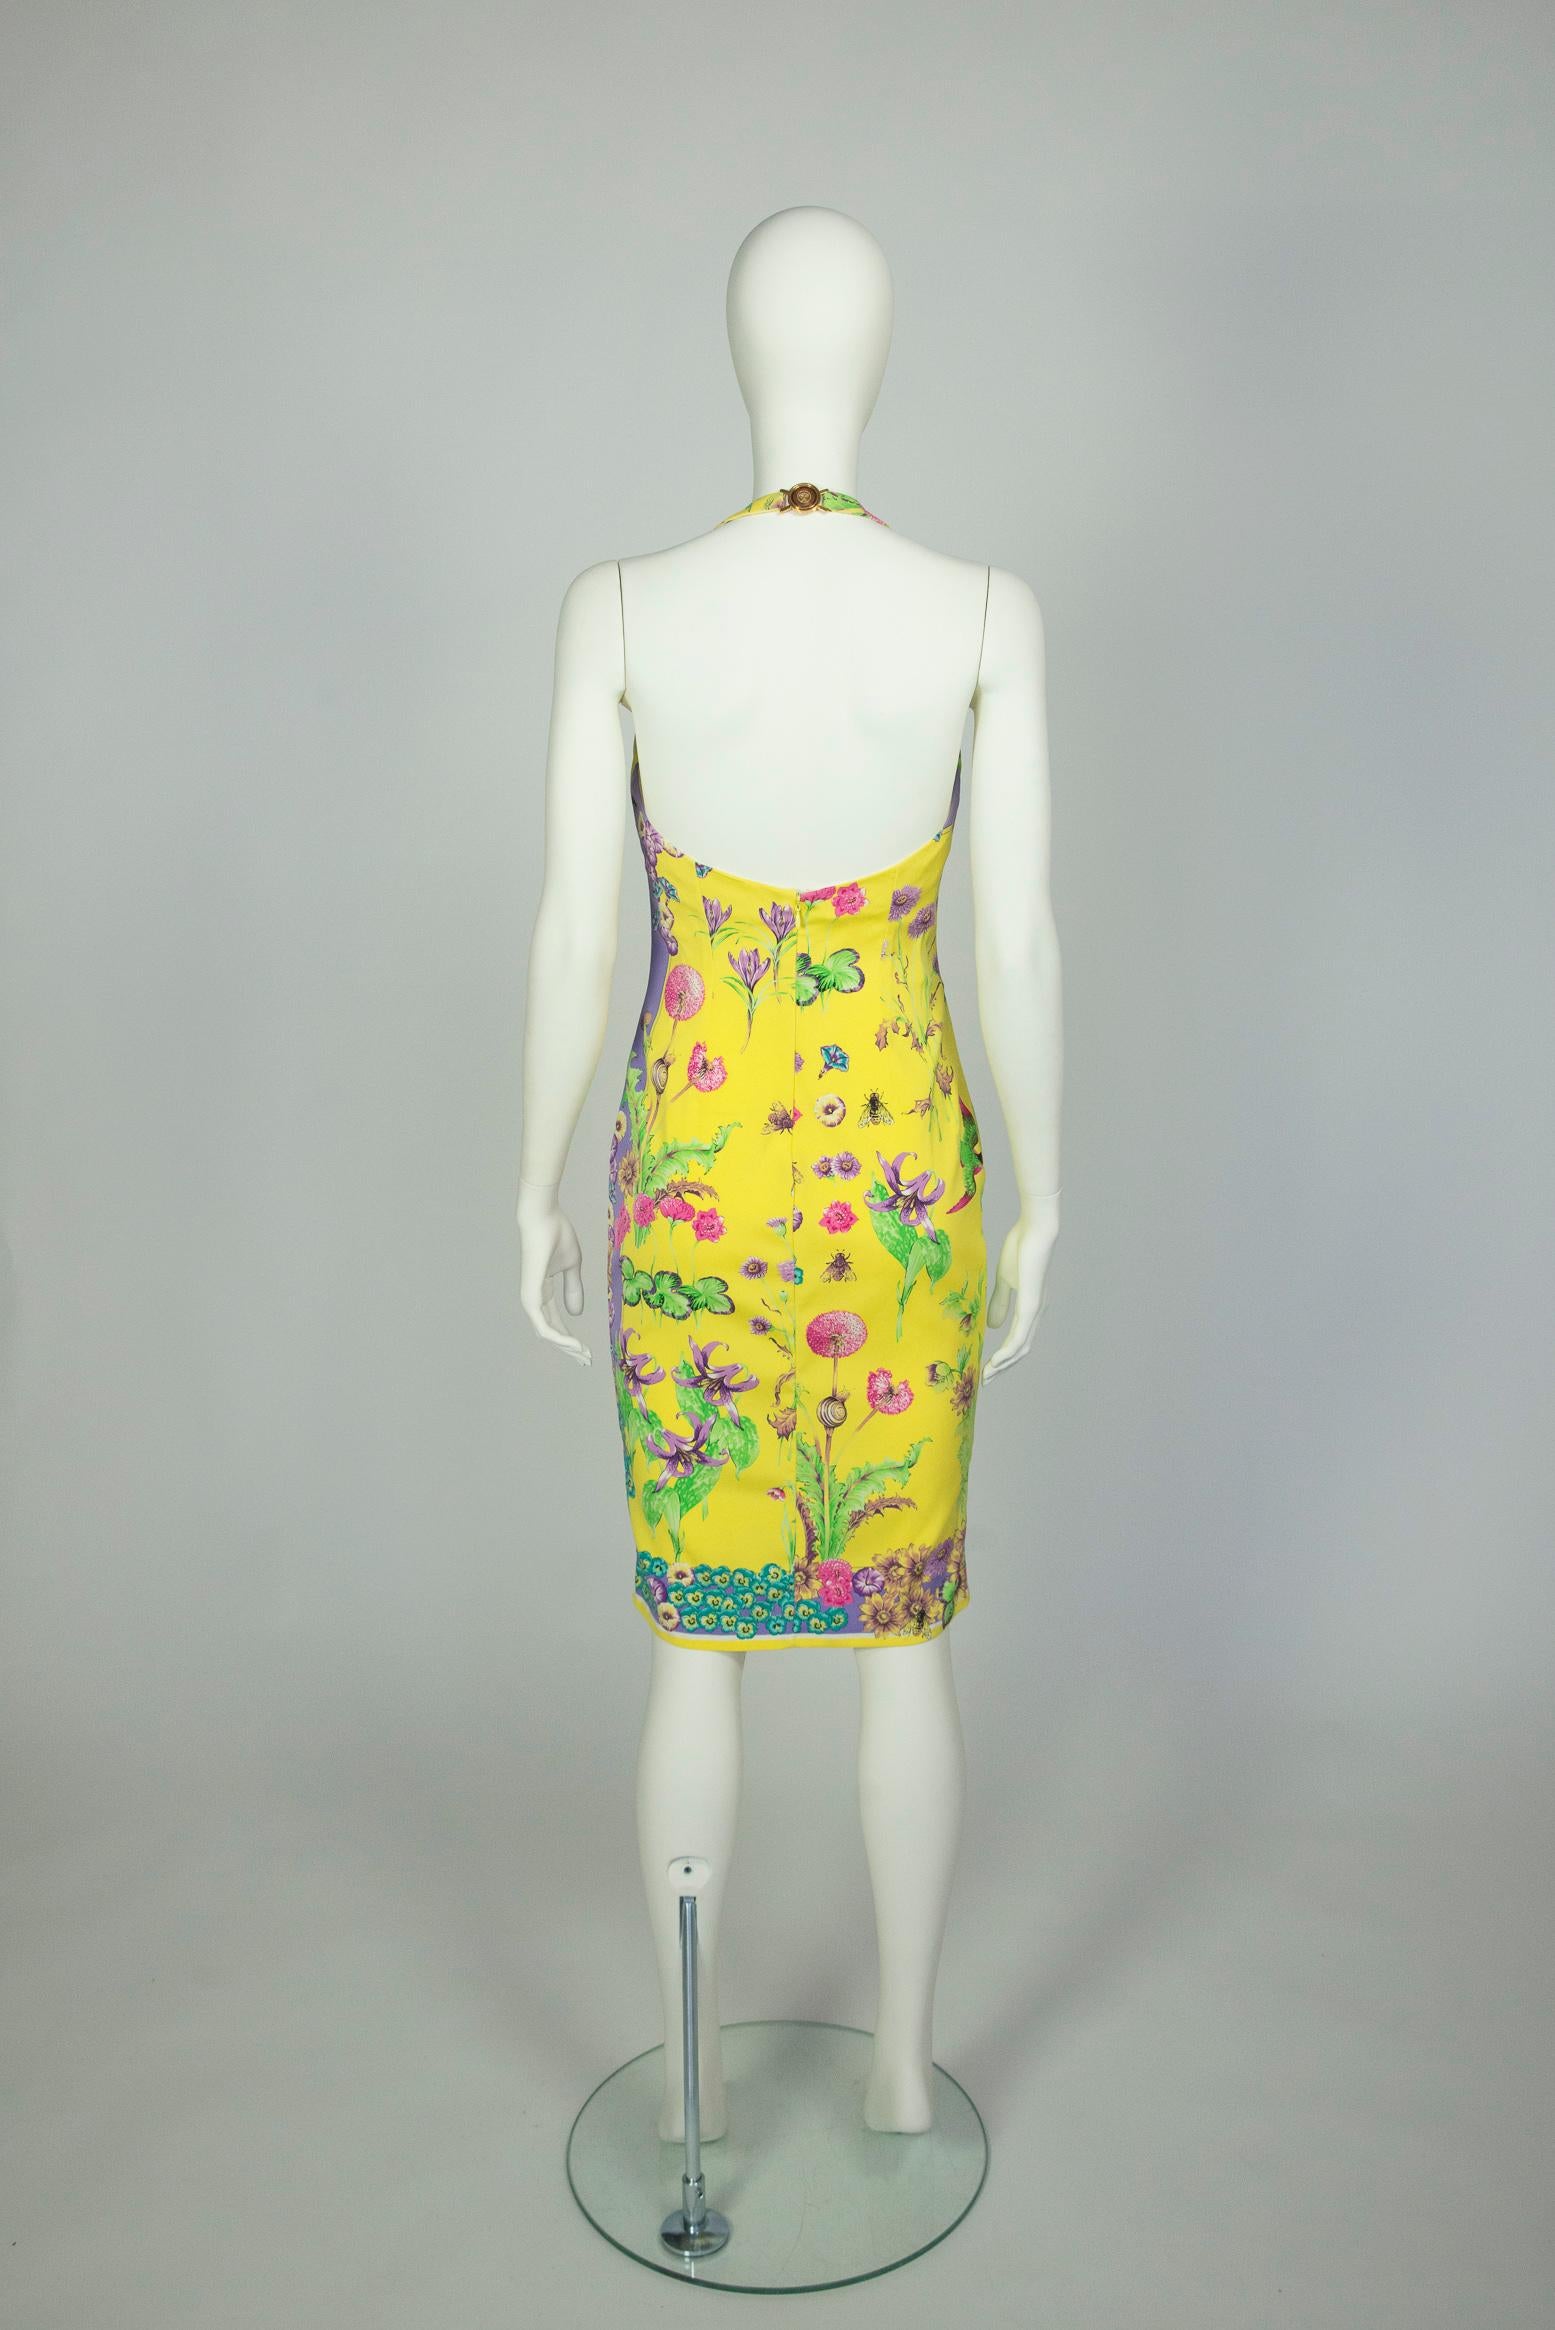 Gianni Versace Couture Printed Halterneck Dress, Circa 1995-1996 For Sale 8